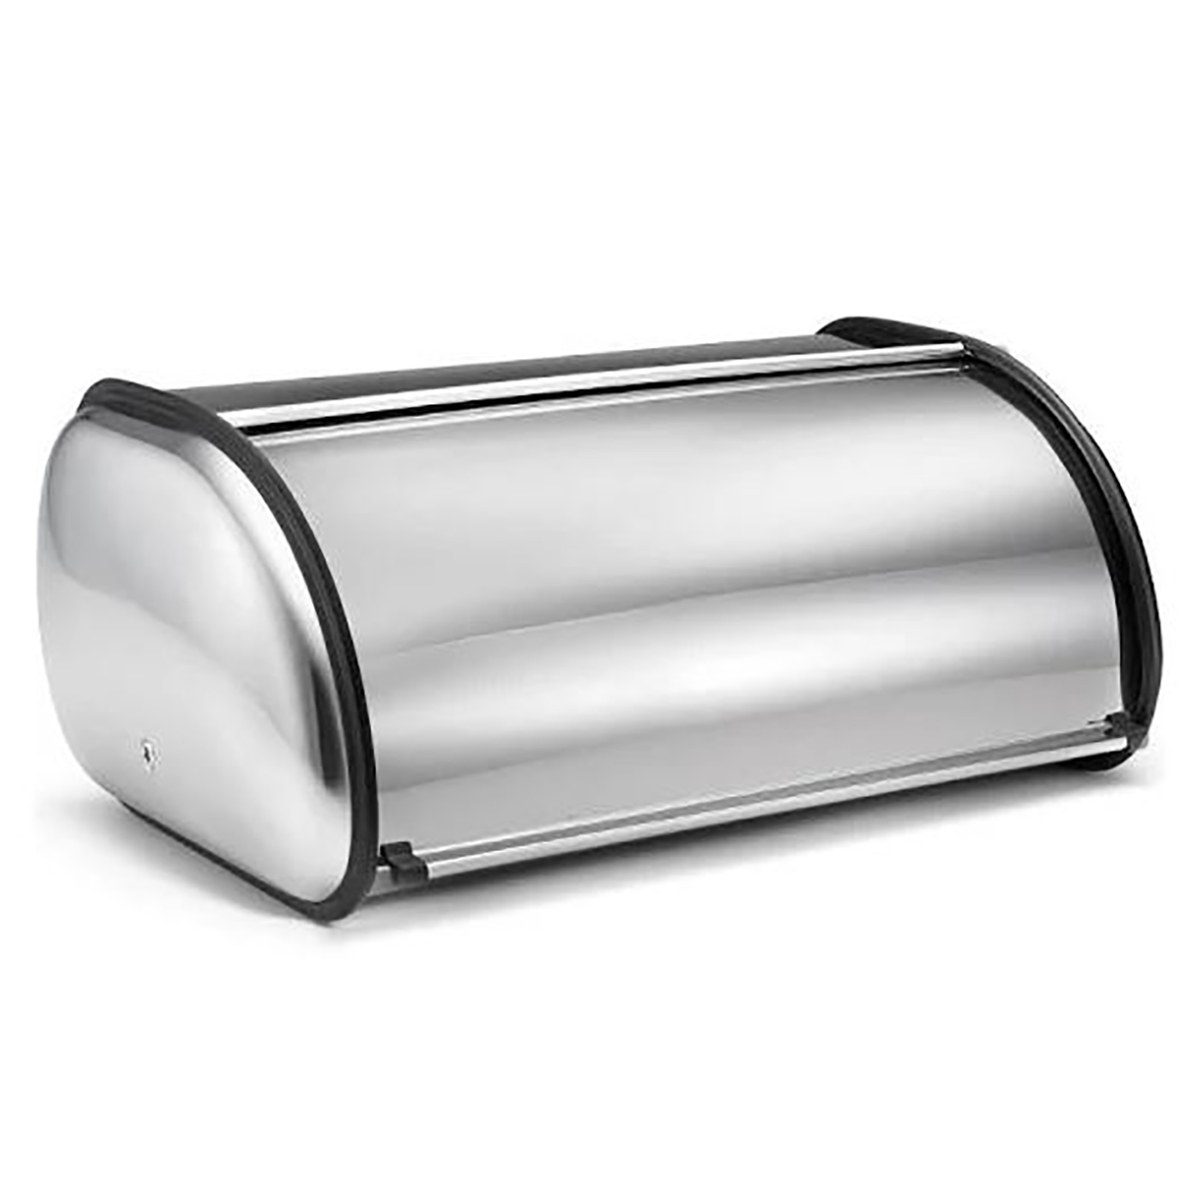 Stainless Steel Bread Box | The Container Store